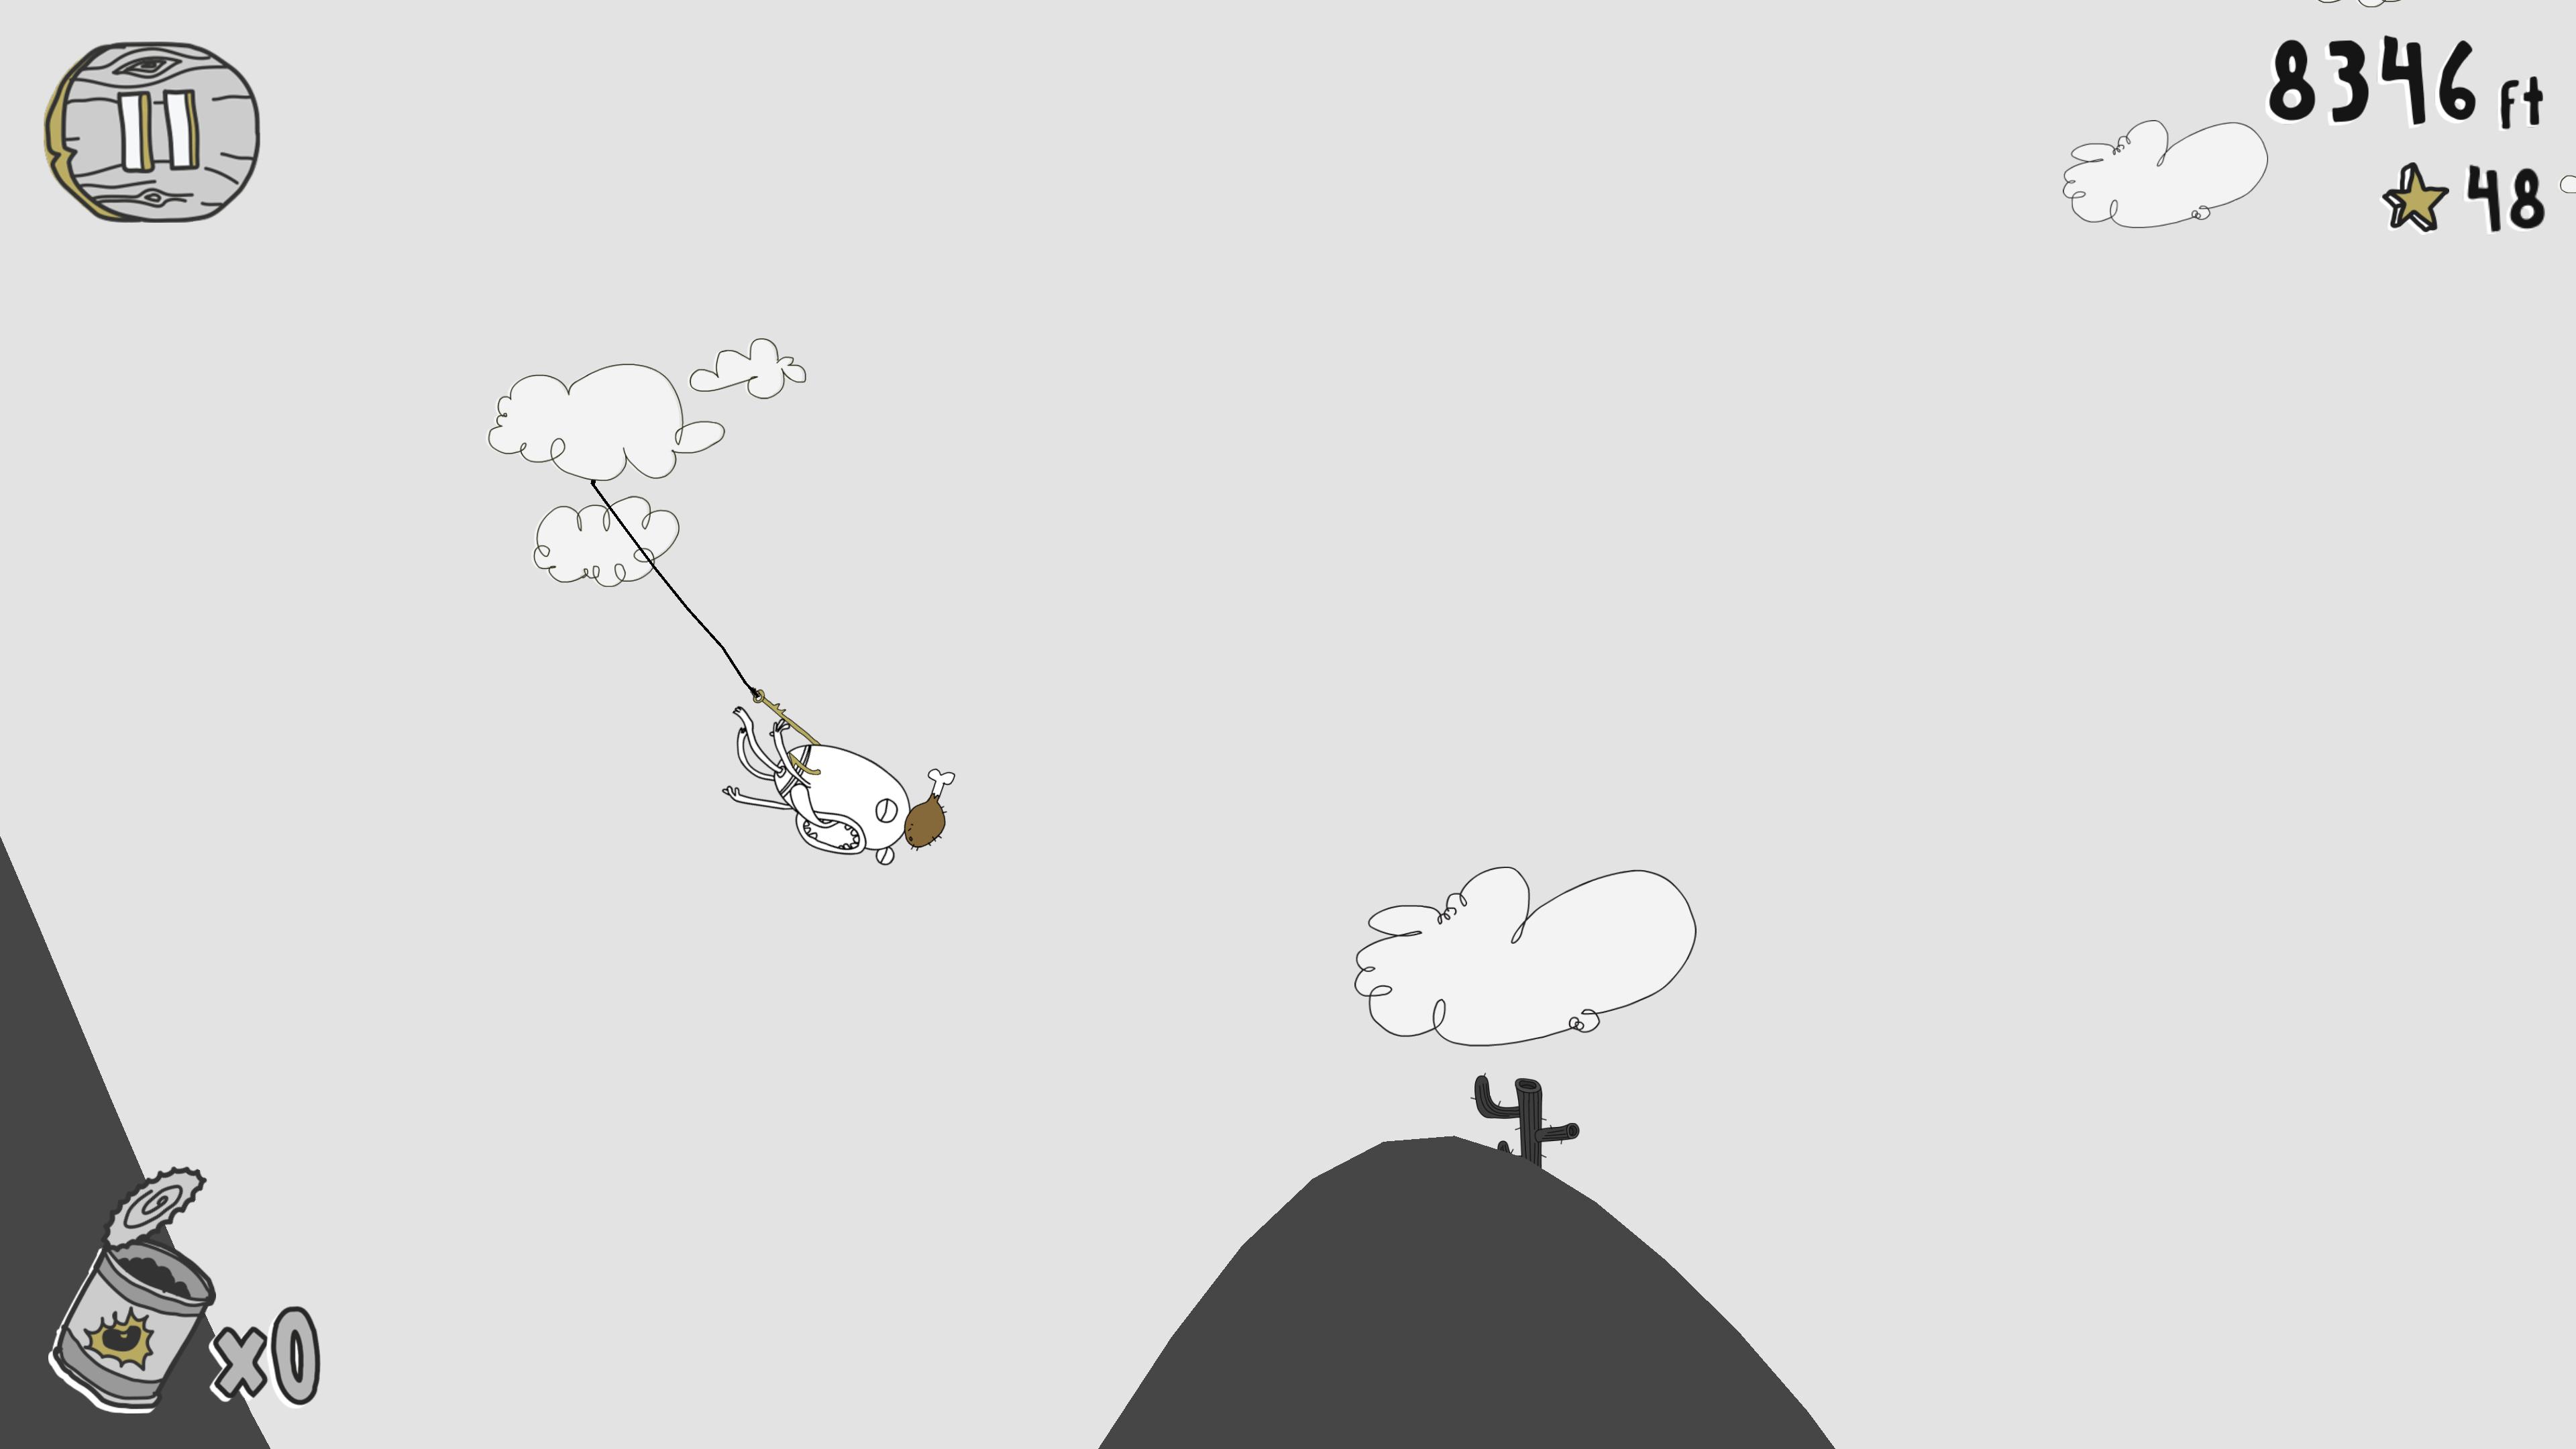 Doofus Drop Silly Rider - Learn to Fart & Fly 1.0.23 Screenshot 24